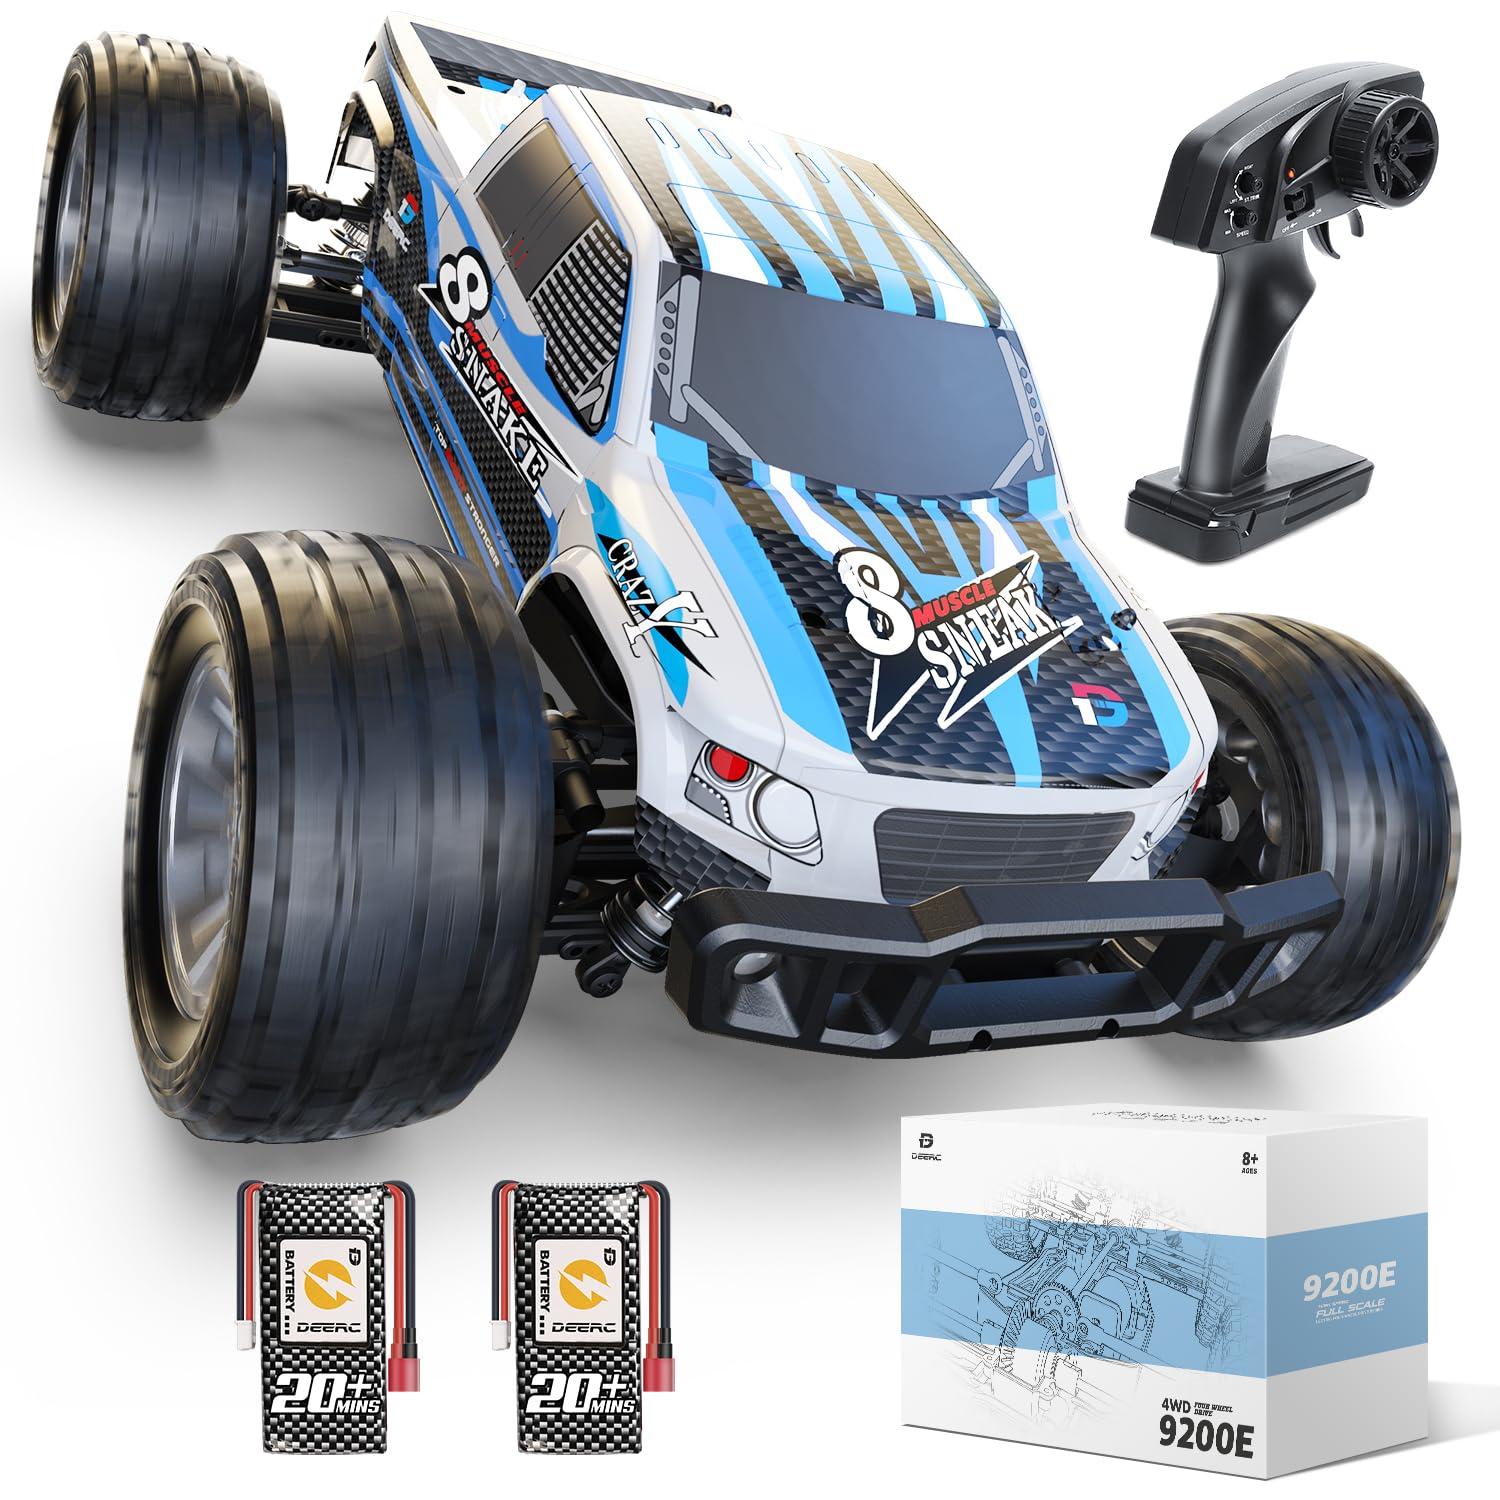 Rc Radio Control Car: Endless possibilities with RC radio control cars.